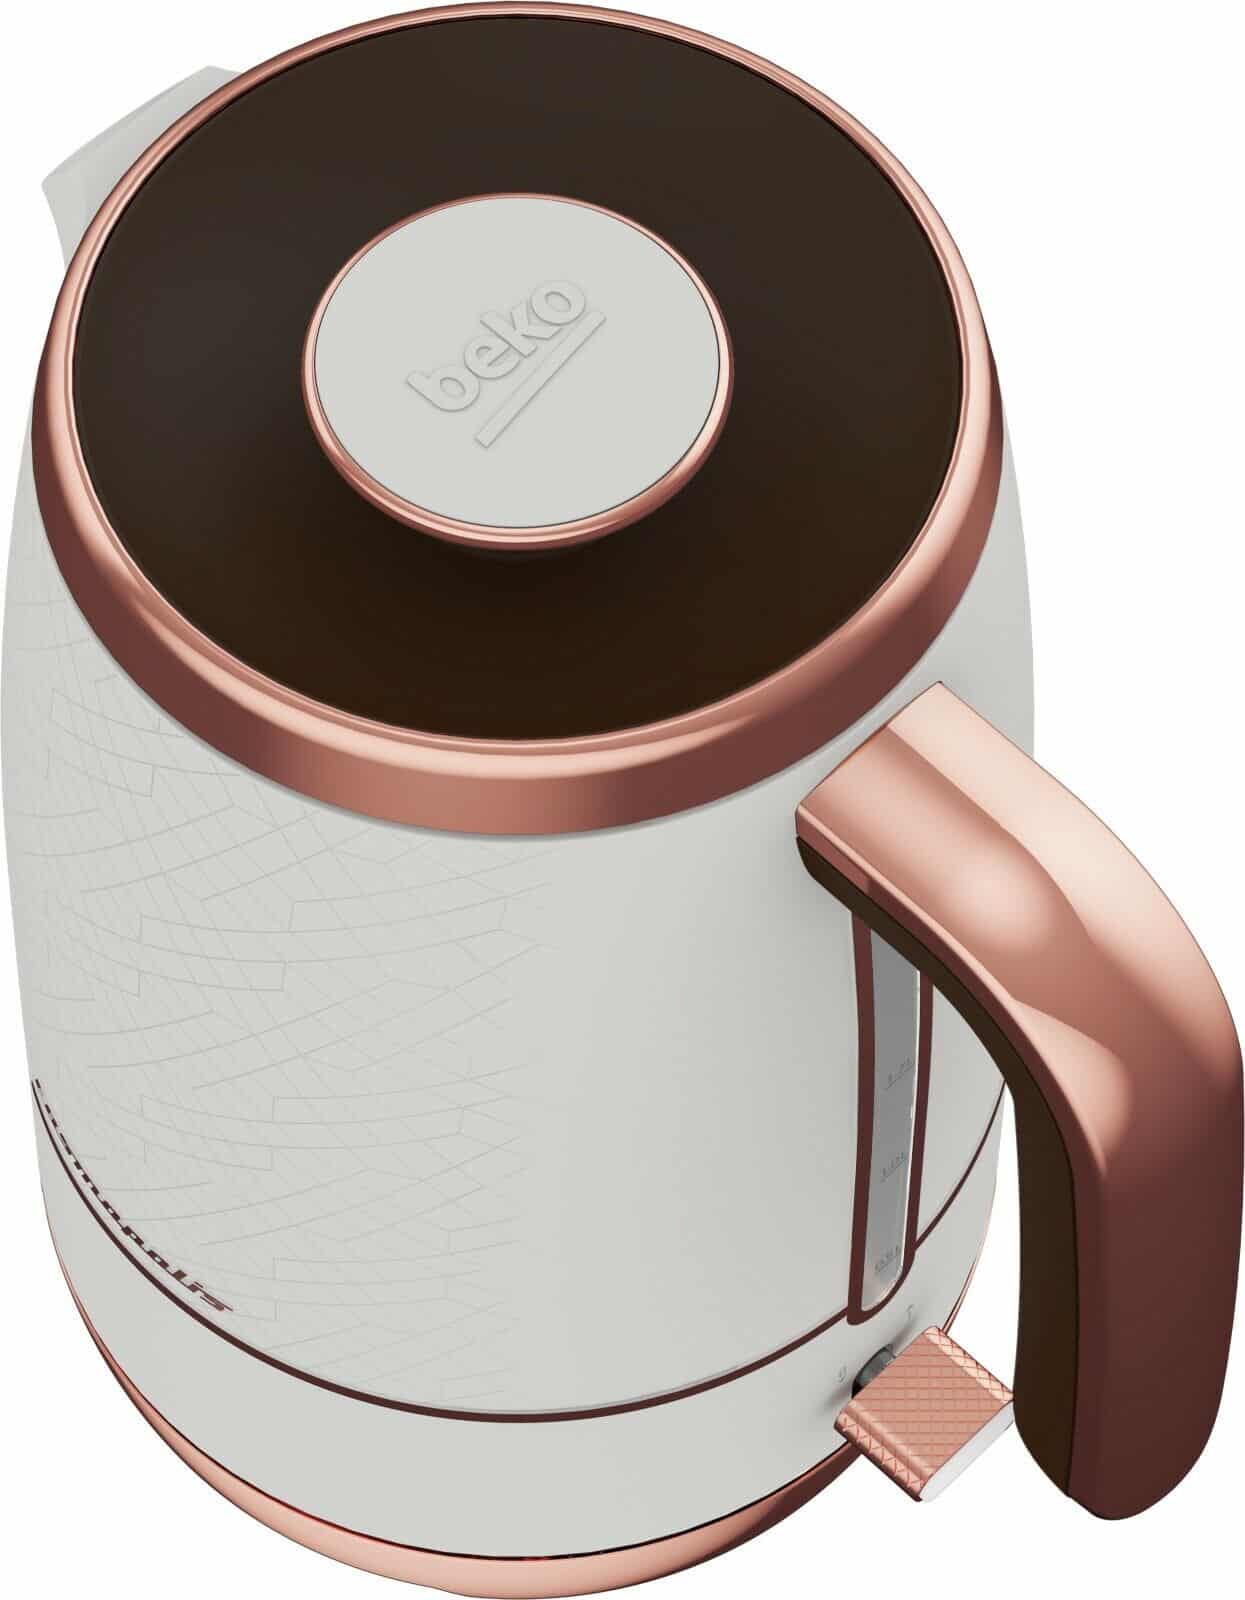 BEKO COSMOPOLIS 1.7L 3000W KETTLE WHITE AND ROSE GOLD-4391